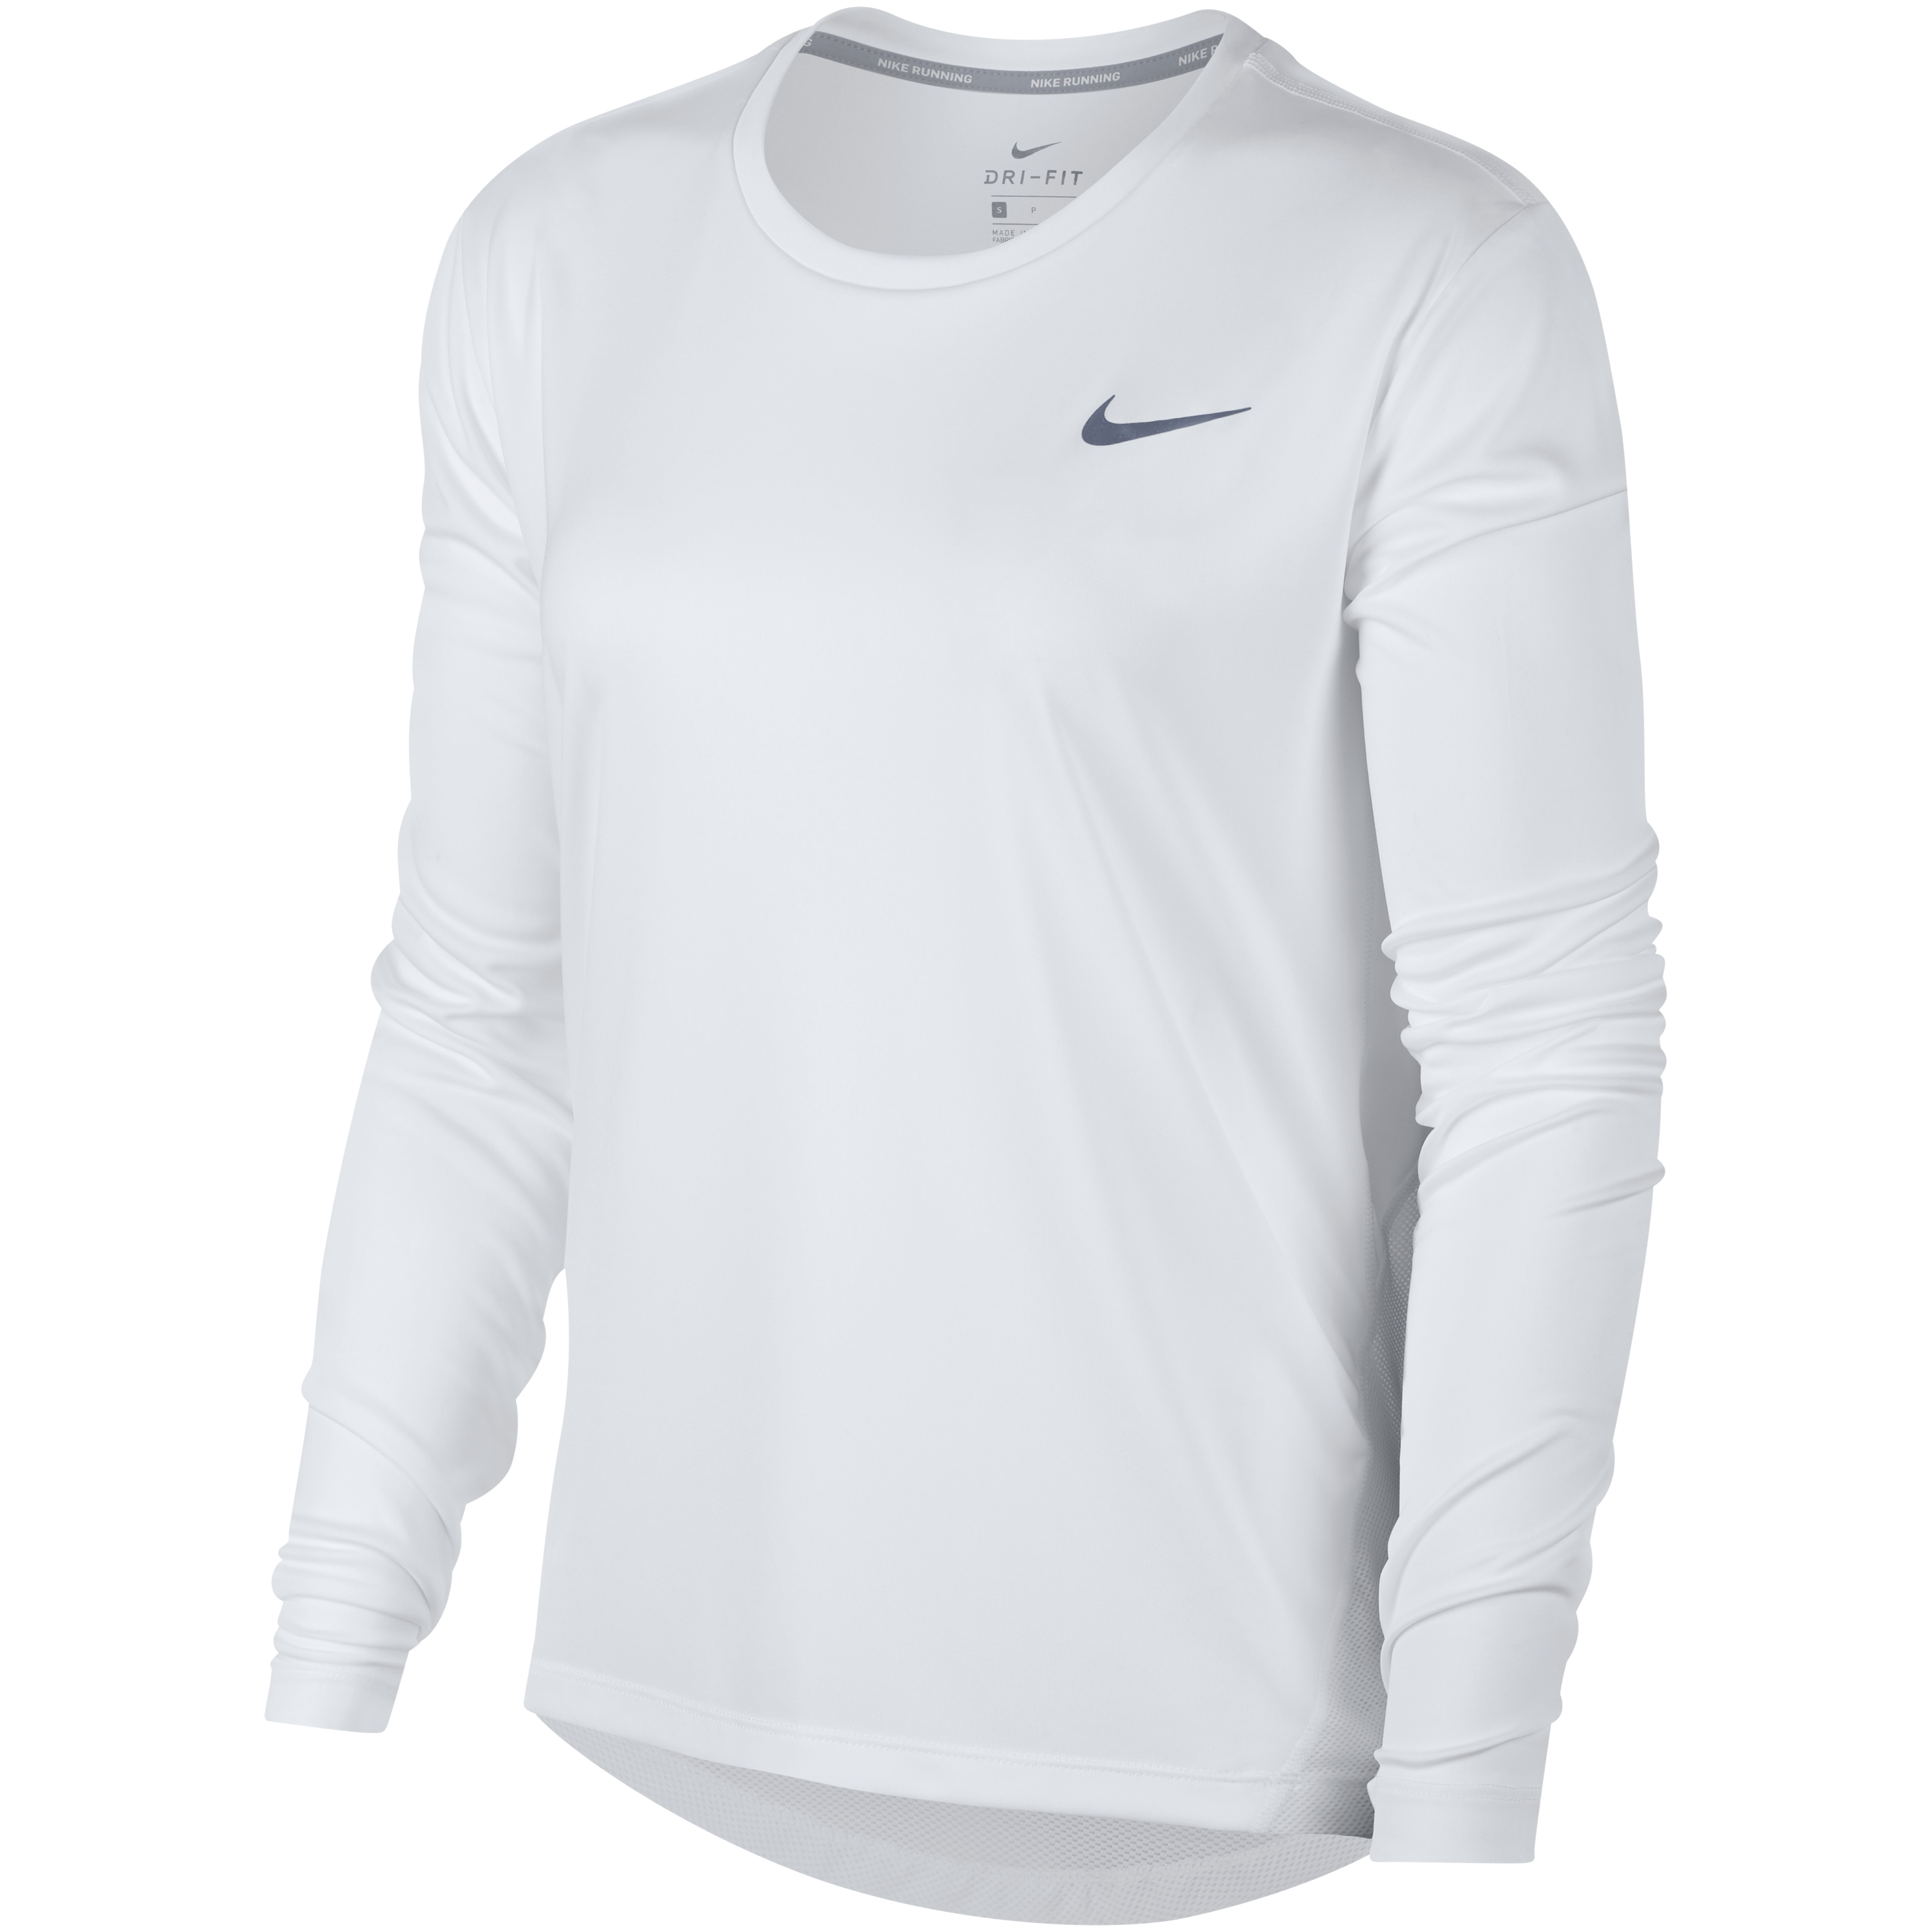 Maillot manches longues femme Nike Miler